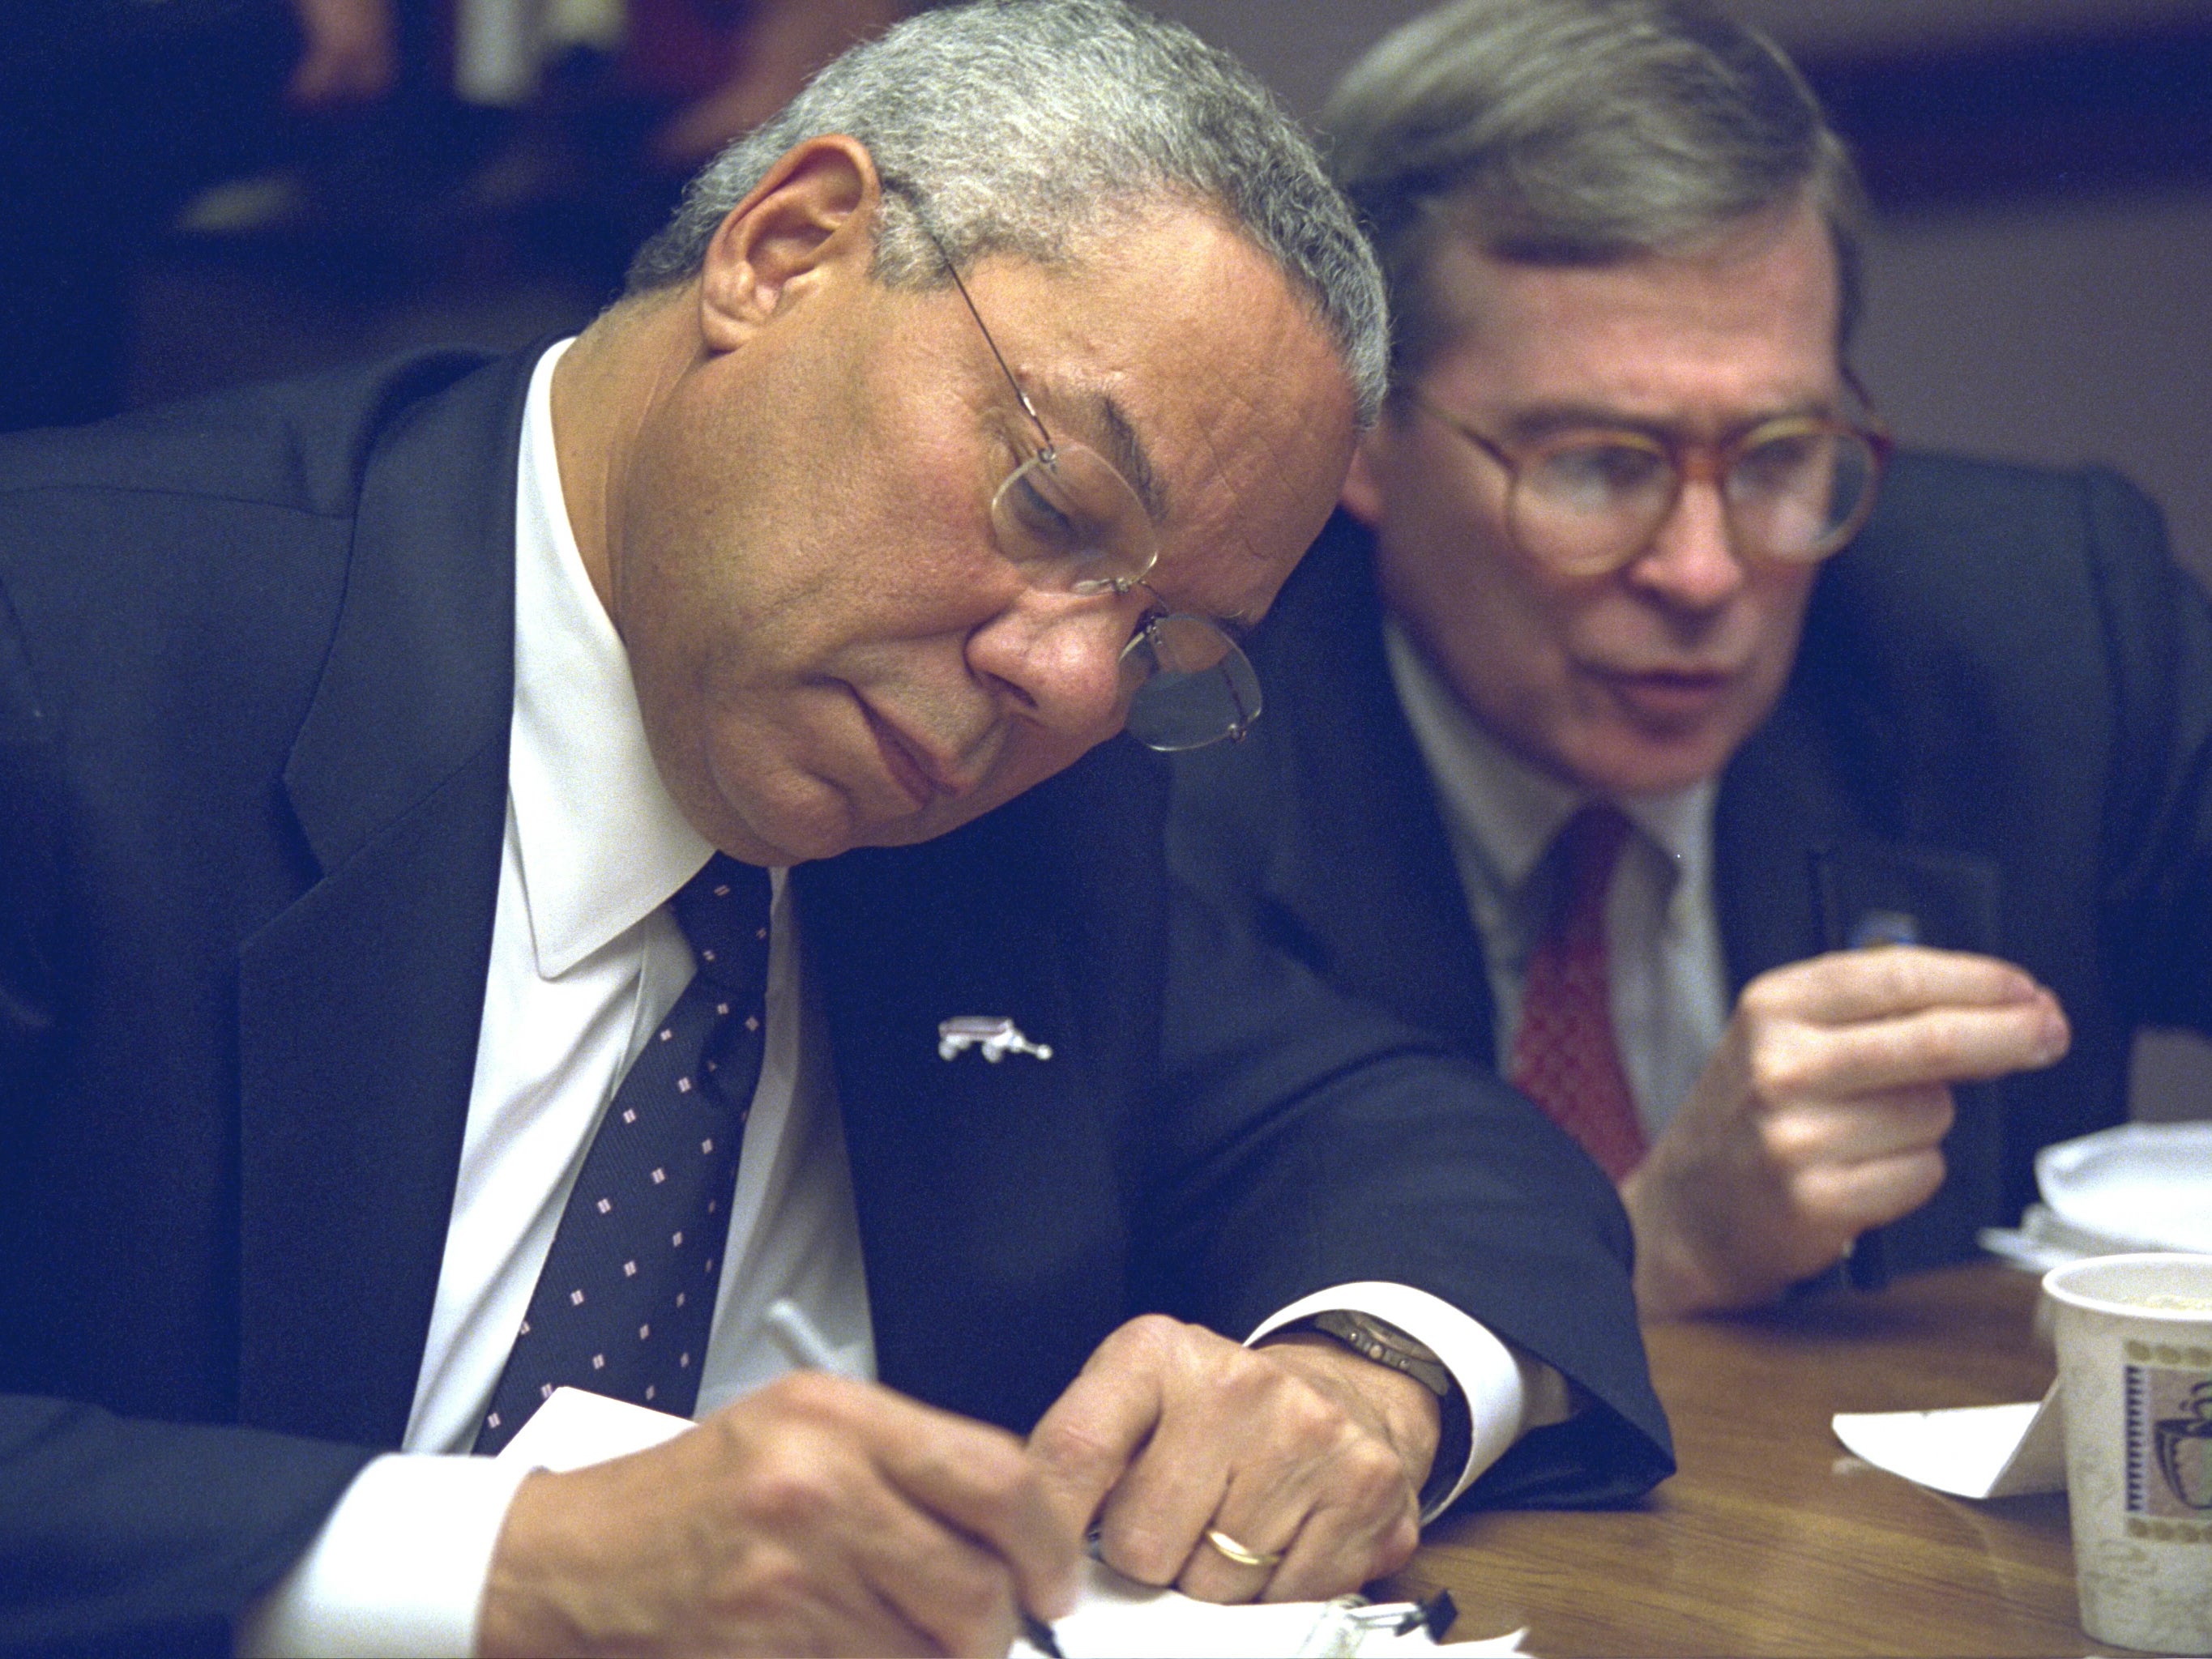 Image of former Secretary of State Colin Powell captured by Dick Cheney's staff photographer